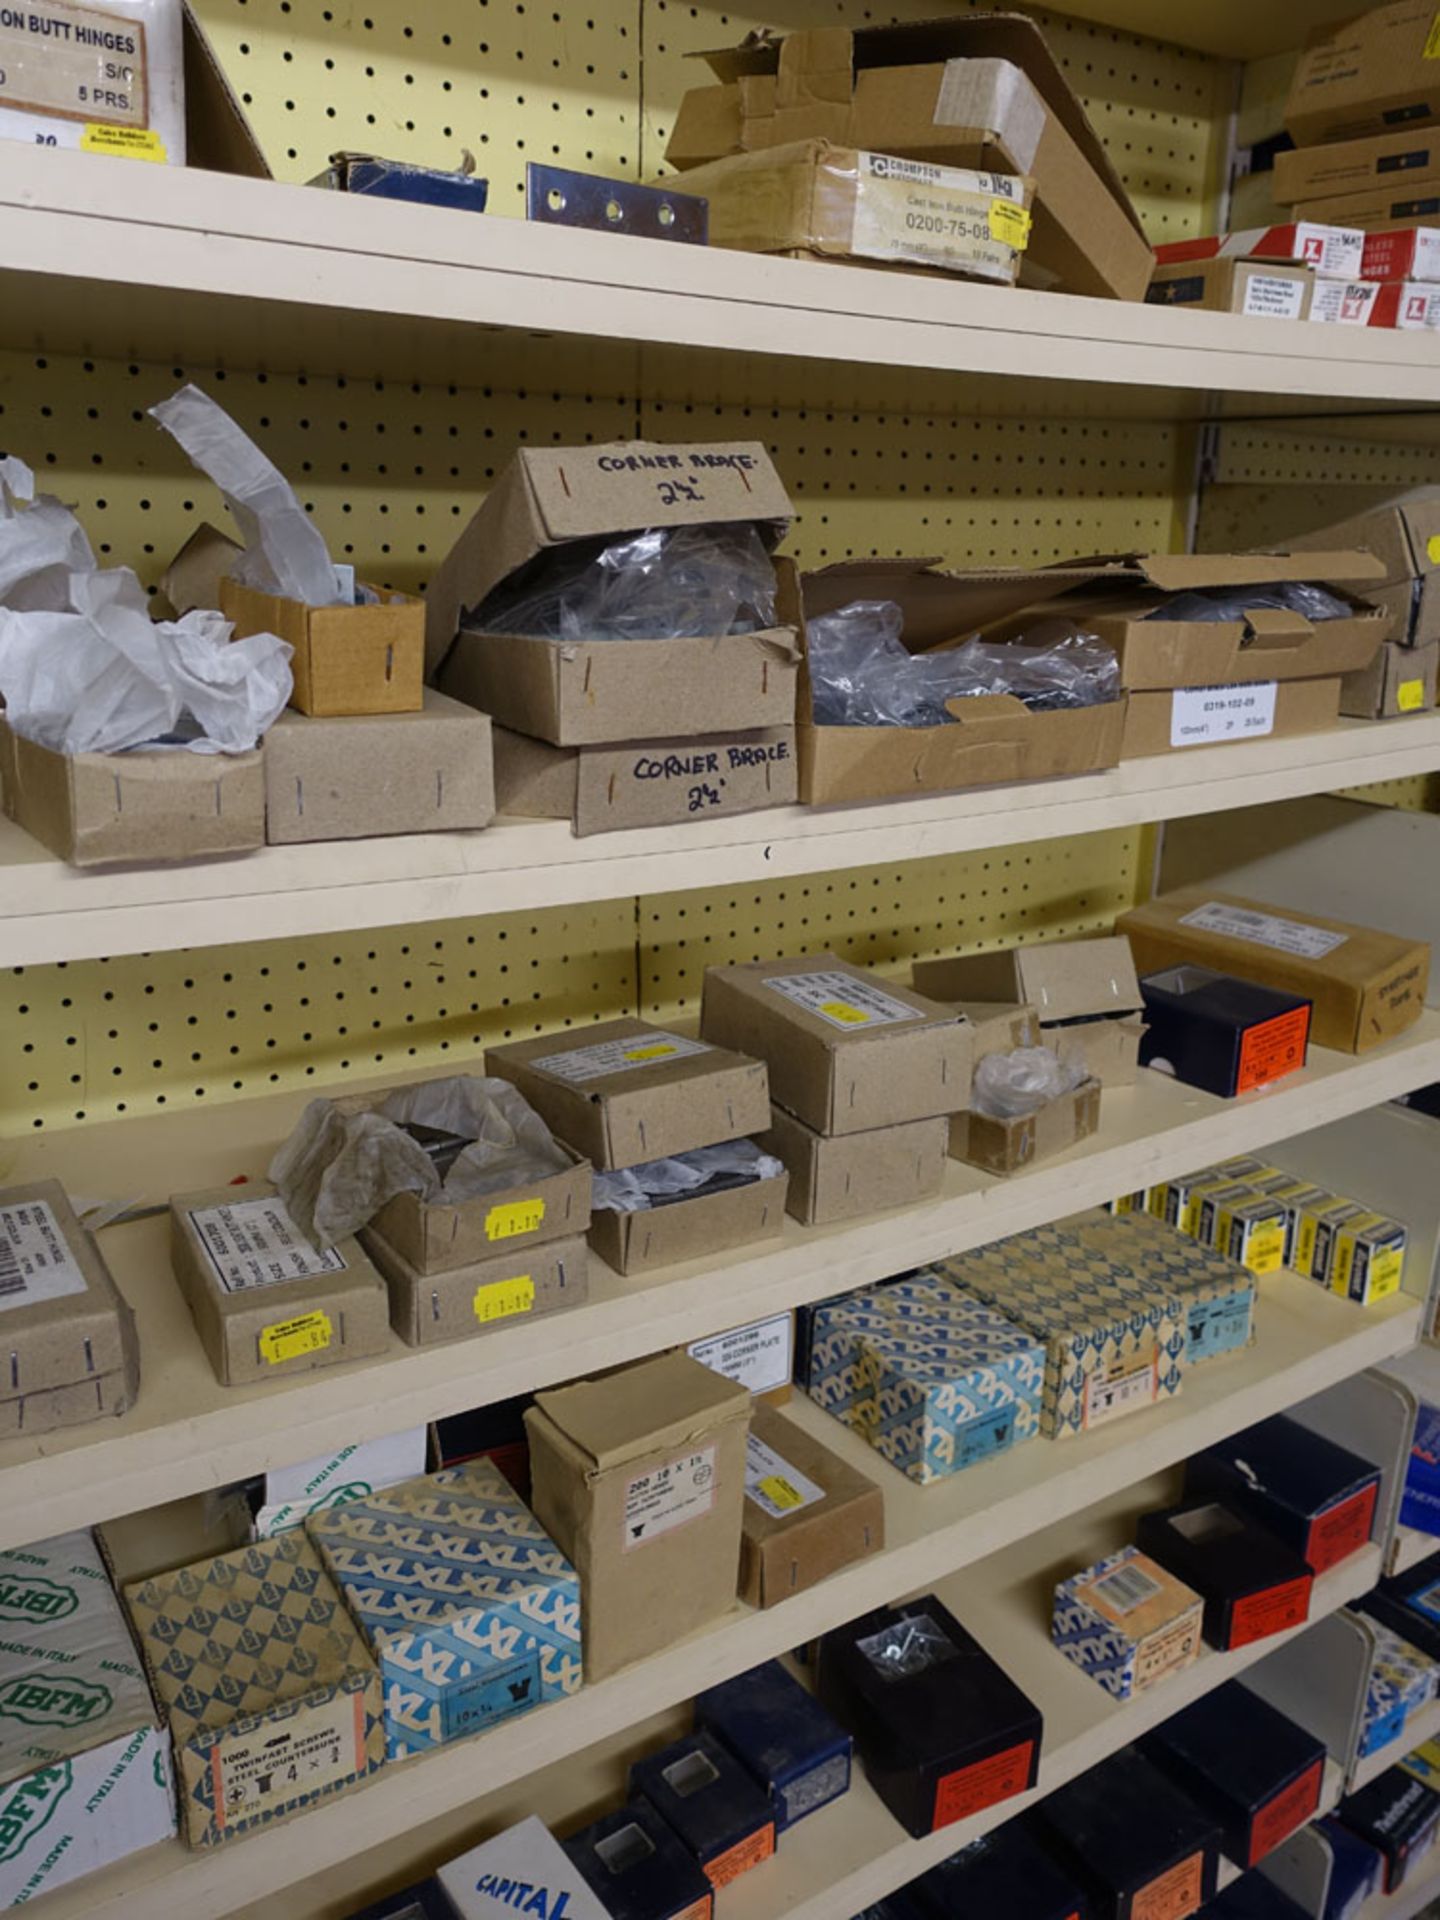 Approximately 260 boxes of various fixings and door furniture including wood screws, butt hinges, - Image 3 of 5